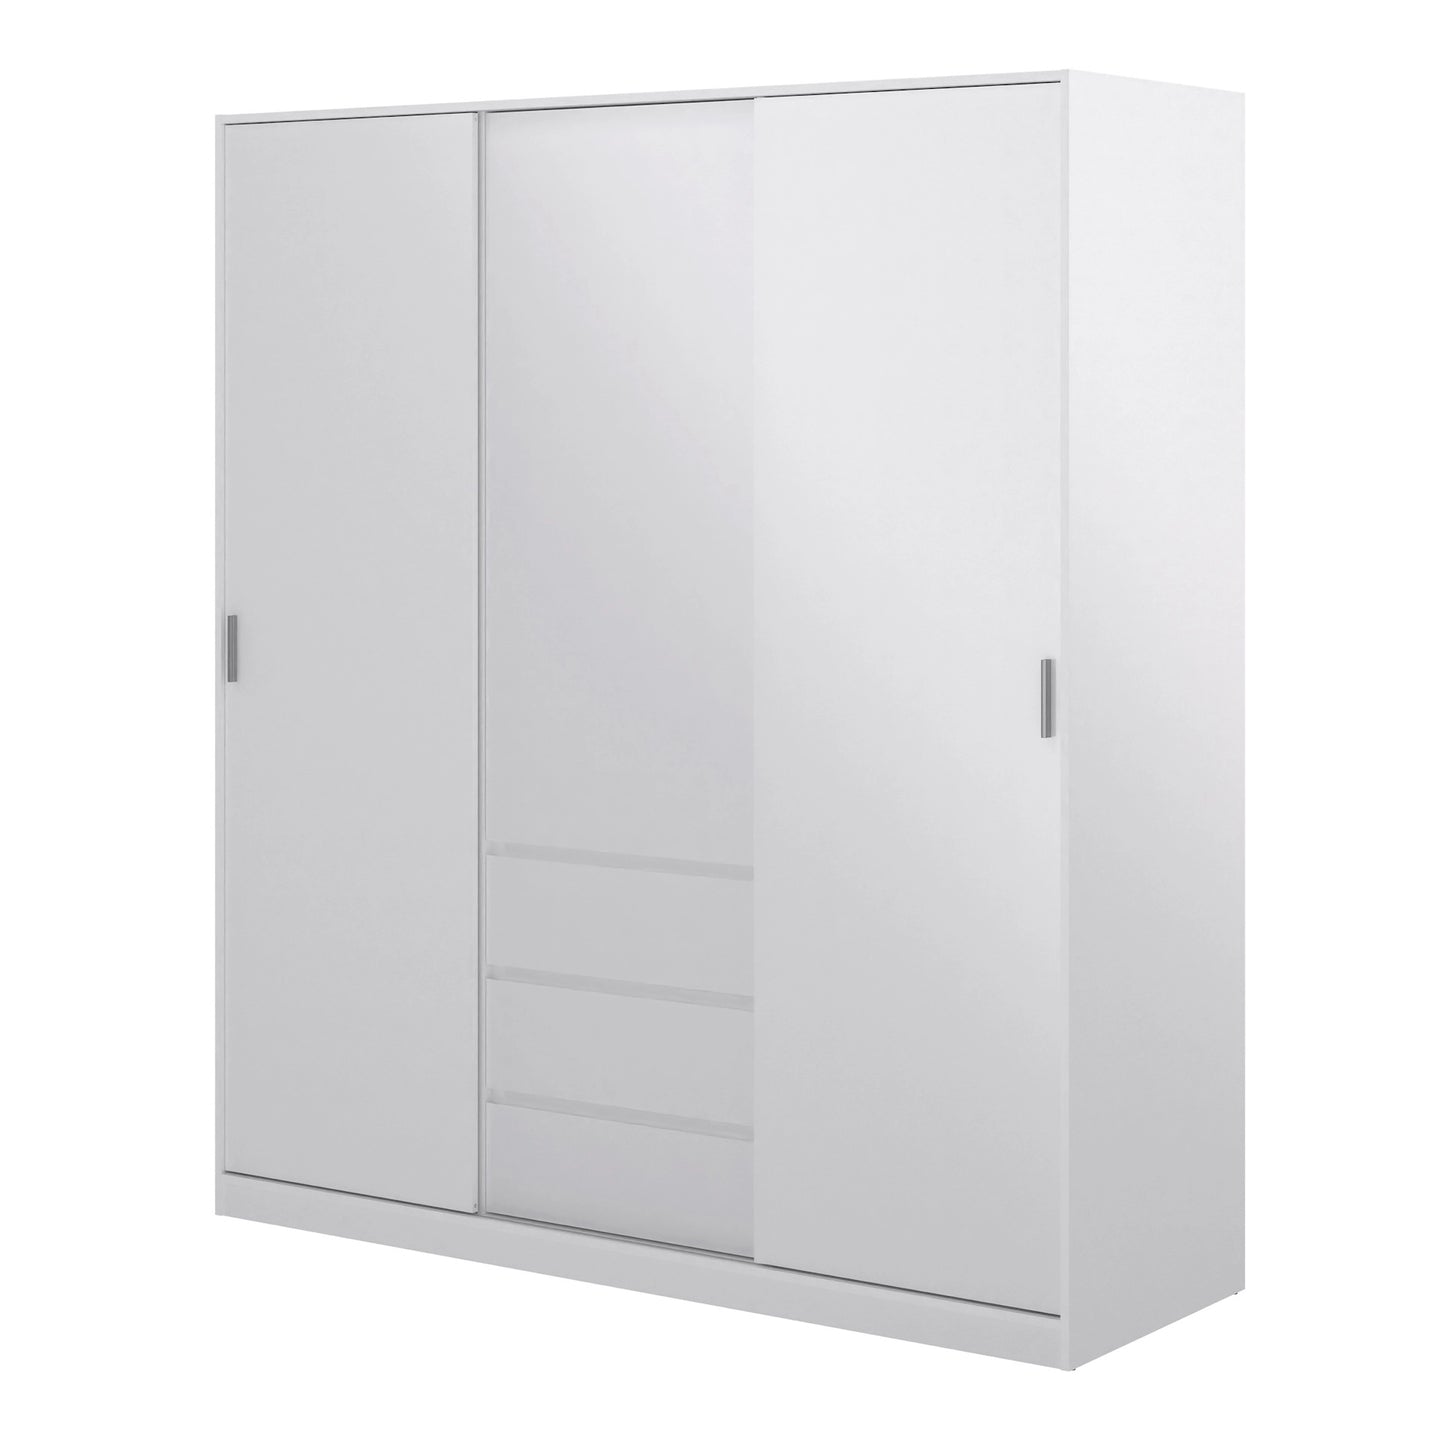 Furniture To Go Naia Wardrobe with 2 Sliding Doors + 1 Door + 3 Drawers in White High Gloss